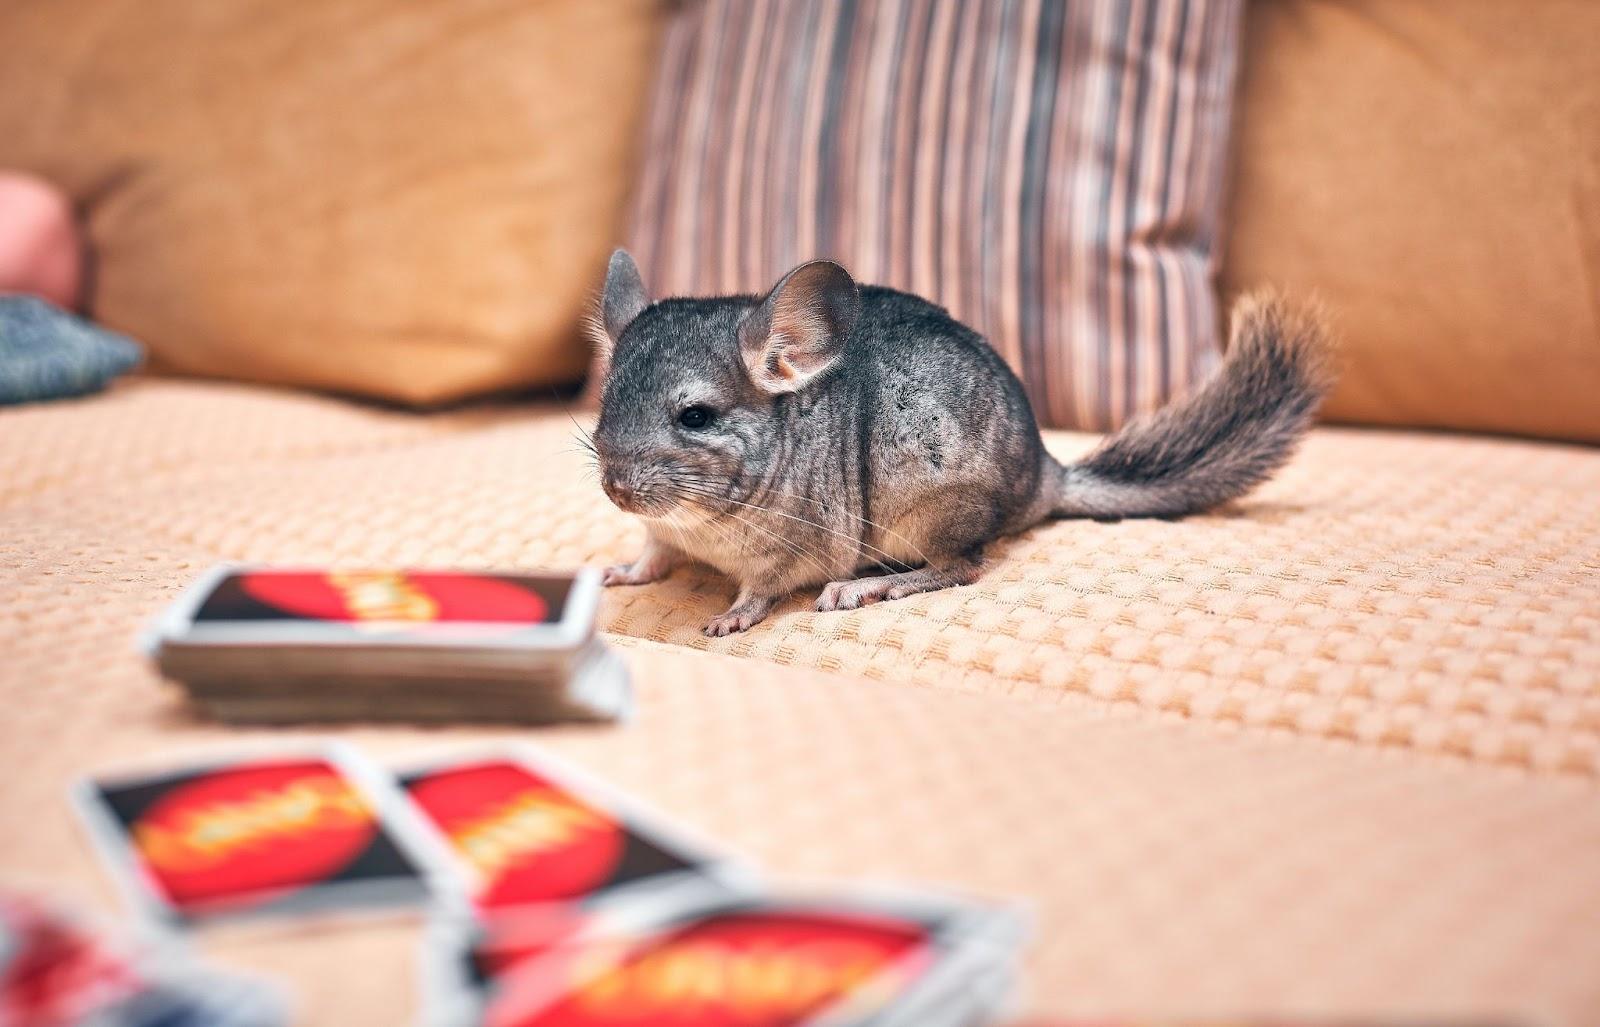 How To Take Care Of Your Chinchilla